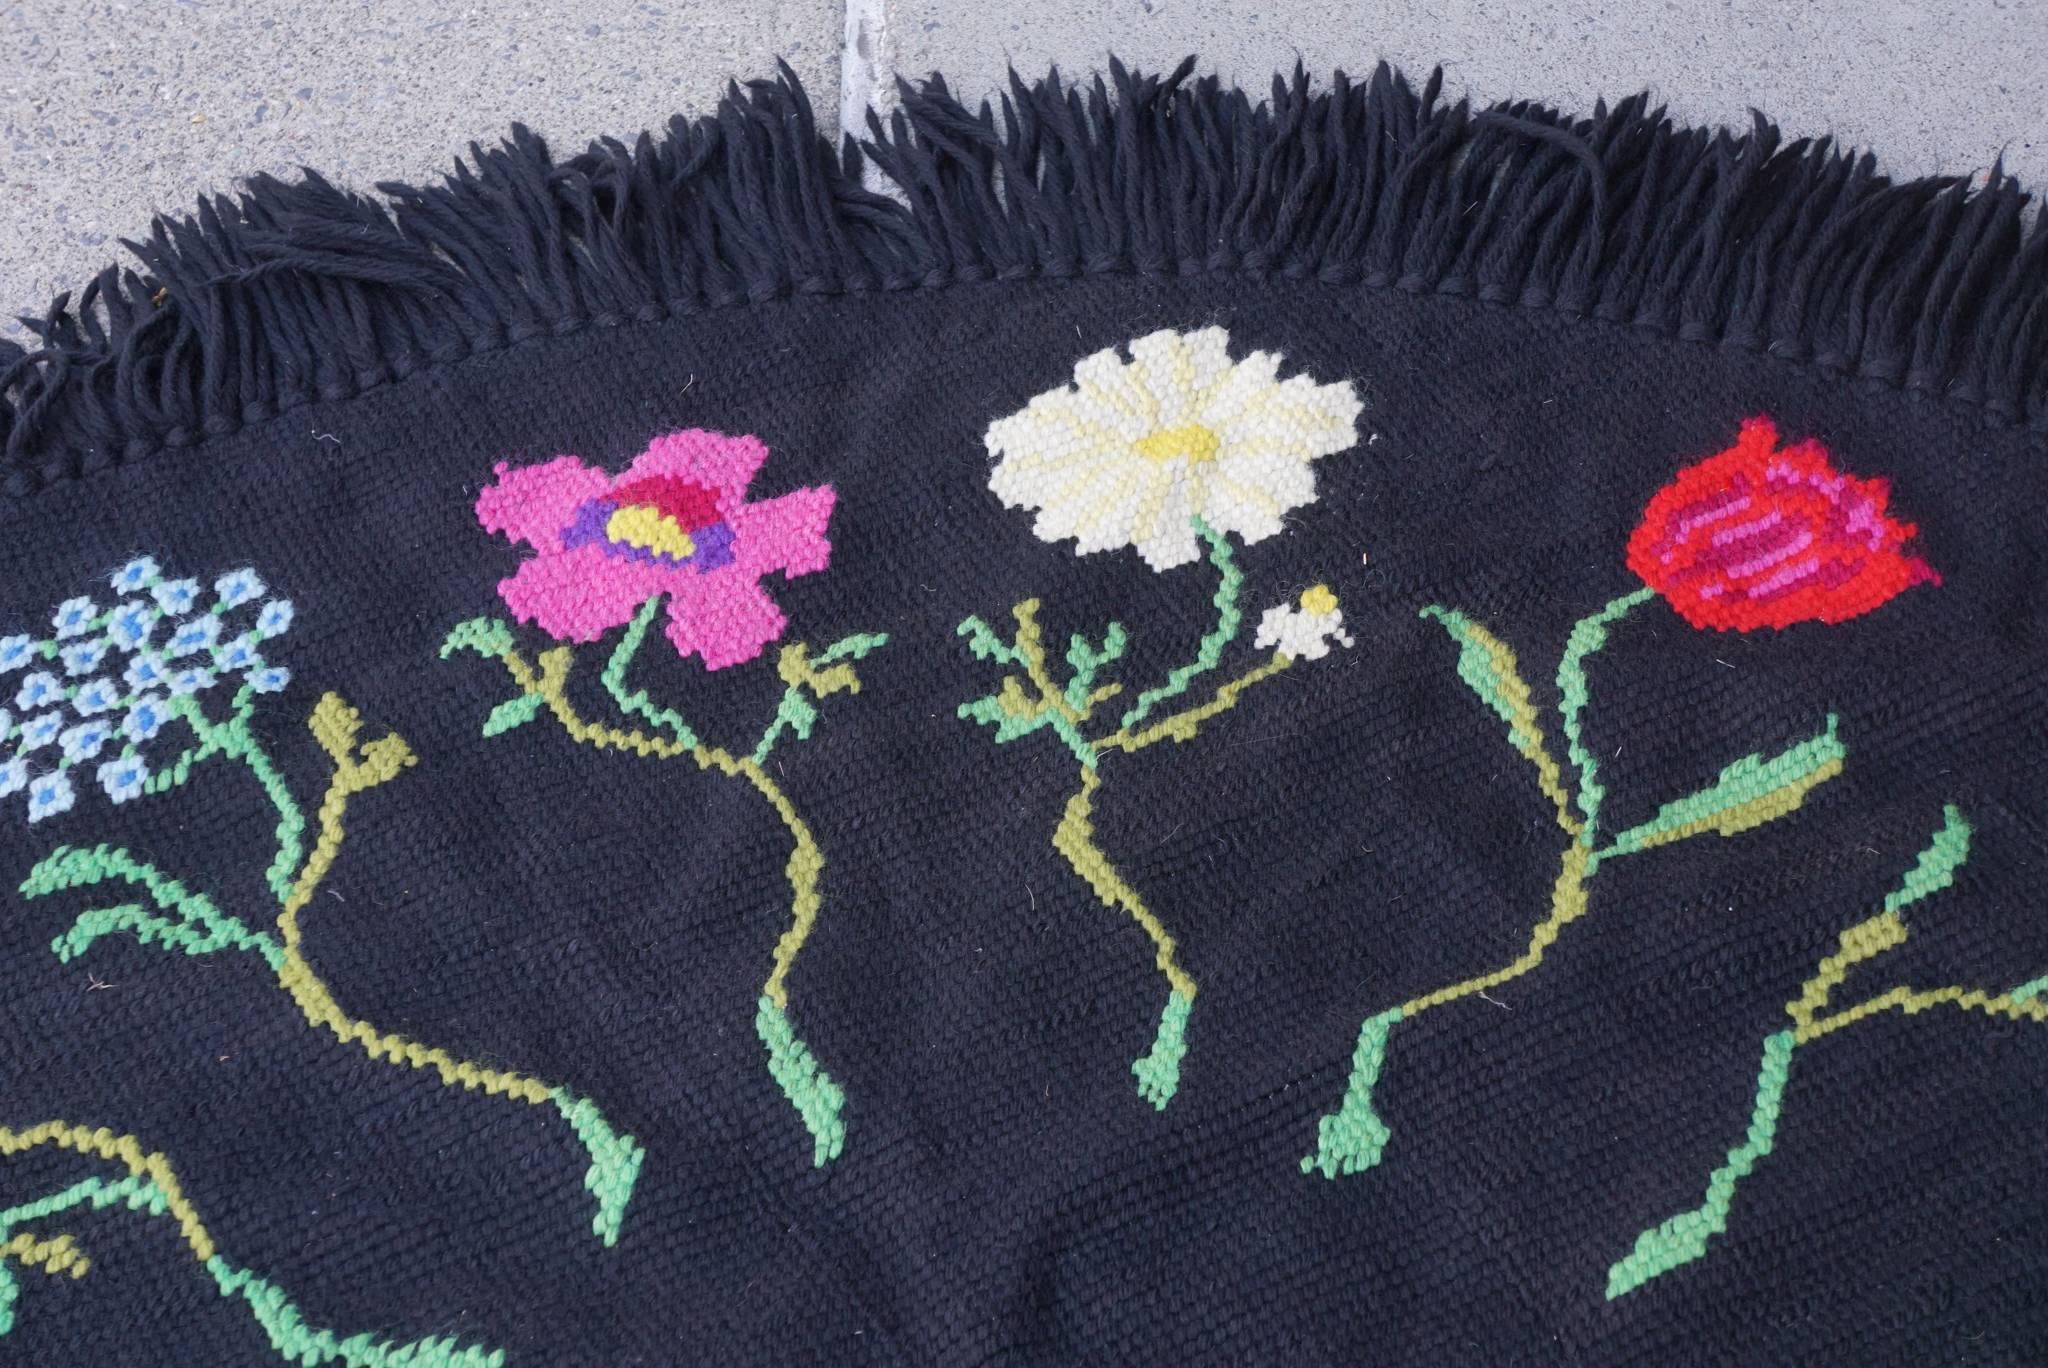 This rug somewhat unusual for its strong black background and the vibrant color selection comes from the collection of Bunny Mellon. Well known for her discerning taste and a life time of philanthropy Mrs. Mellon's driving passion was flowers,